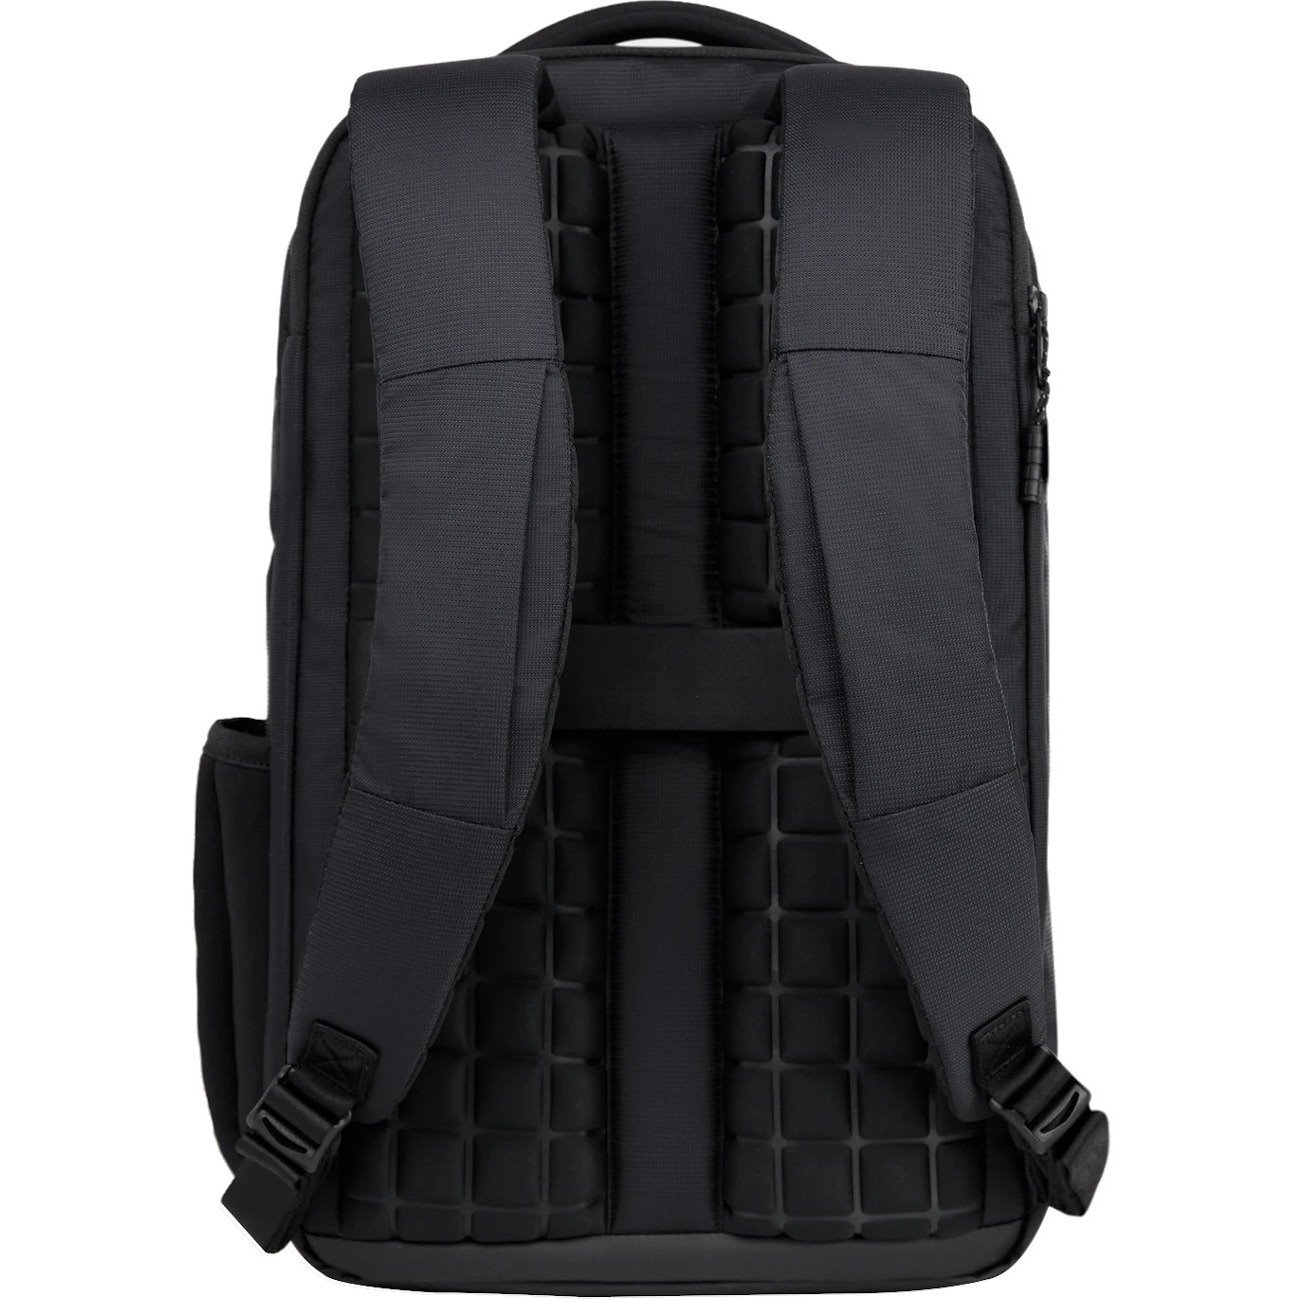 Timbuk2 Division Carrying Case (Backpack) for 15" Notebook - Eco Black Deluxe